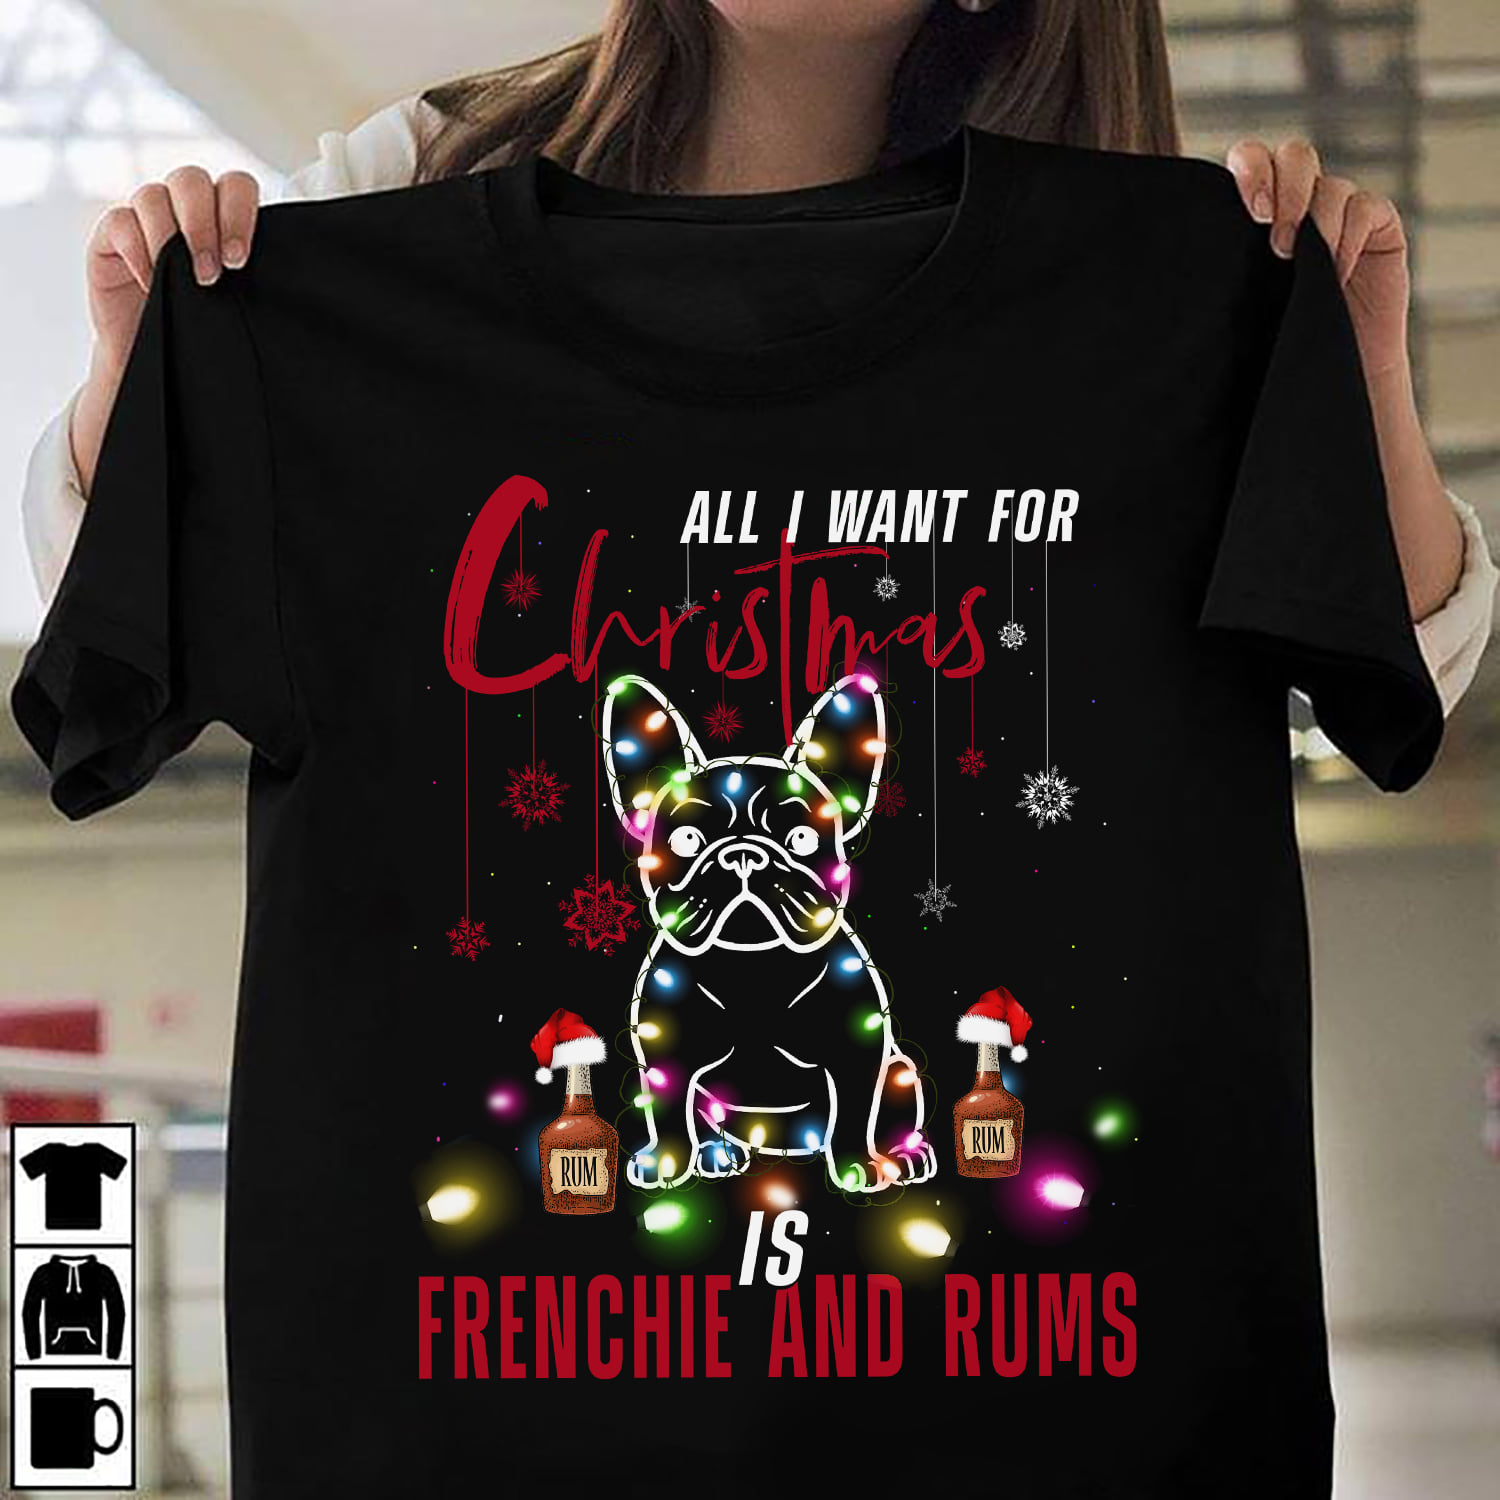 All I want for Christmas is Frenchie and rums - Rum wine for Christmas, Christmas day ugly sweater